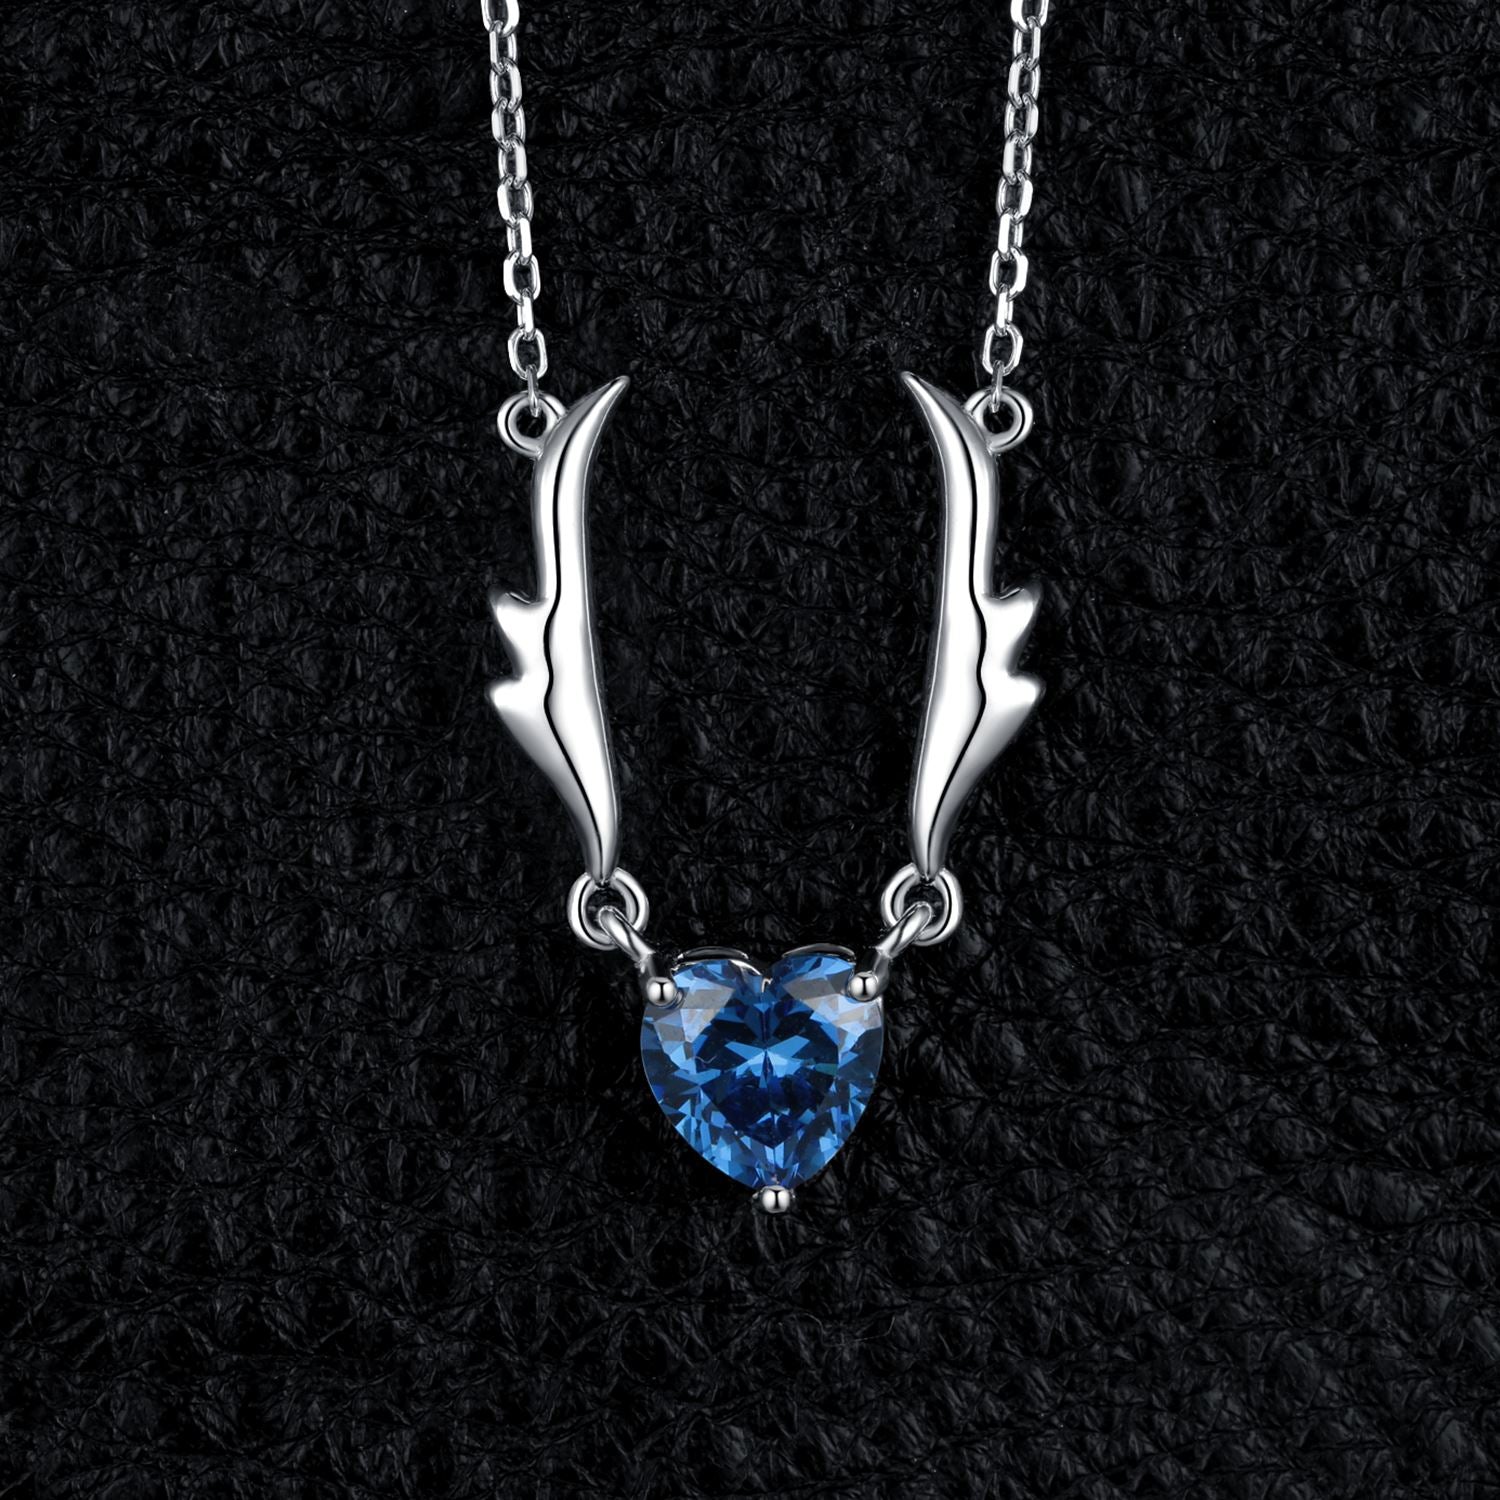 JewelryPalace New Arrival Angel Wing 1.5ct Love Heart Blue Gemstone 925 Sterling Silver Pendant Necklace for Woman Fashion 45cm - Charlie Dolly